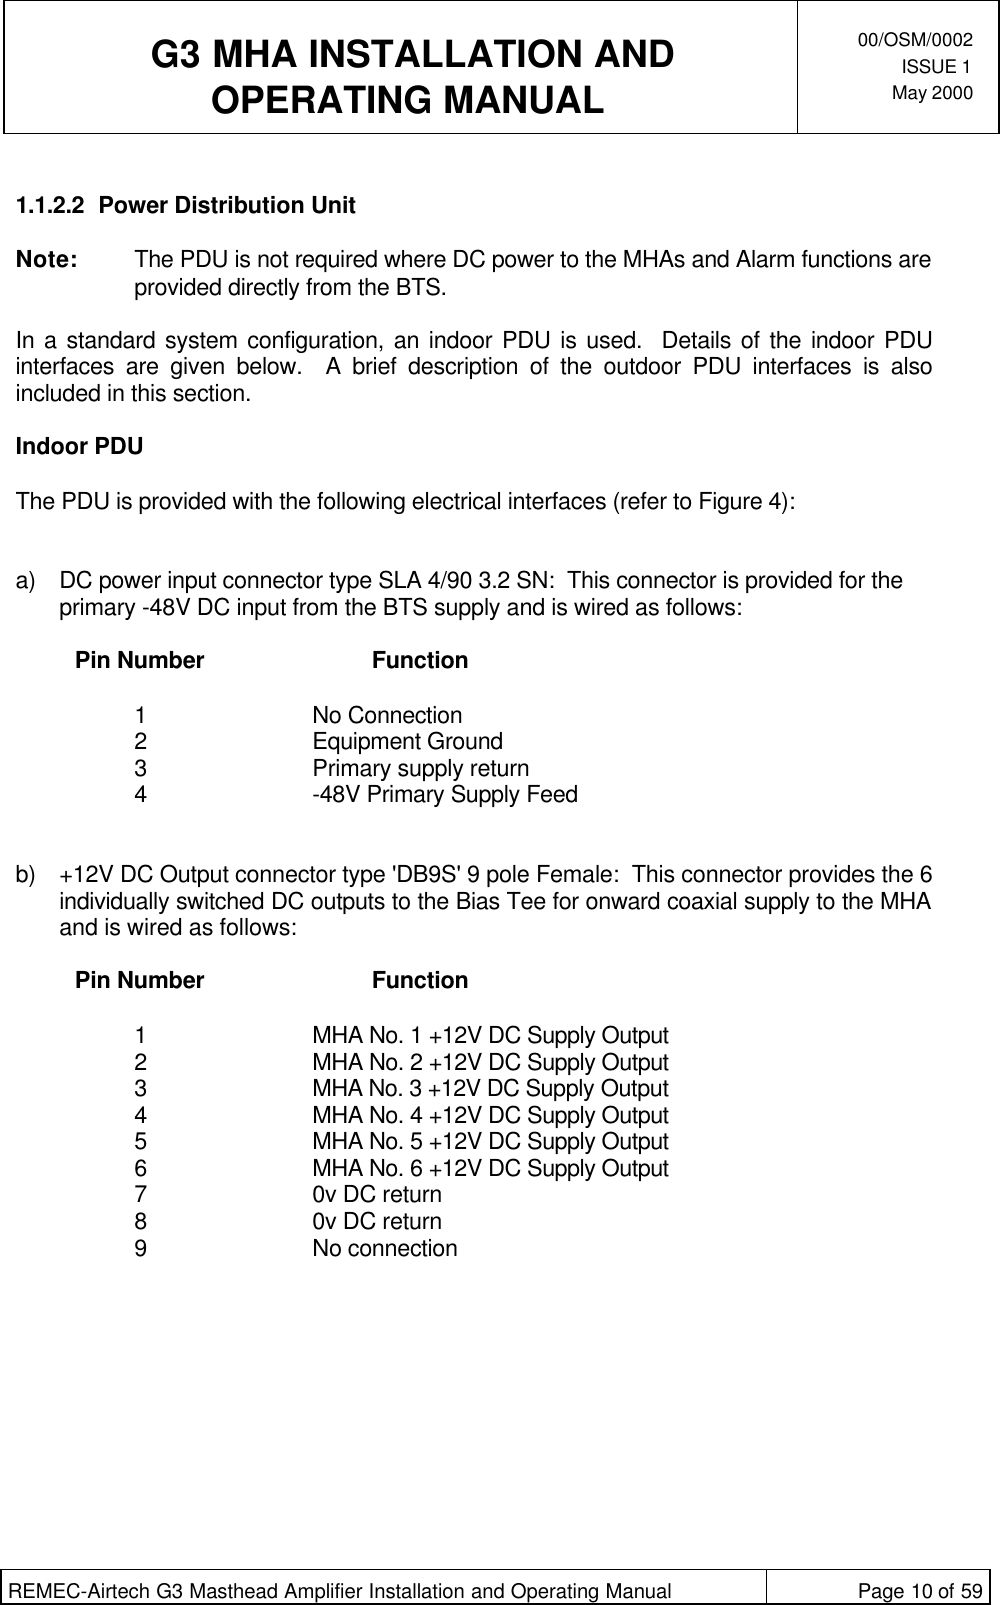  G3 MHA INSTALLATION ANDOPERATING MANUAL00/OSM/0002ISSUE 1May 2000REMEC-Airtech G3 Masthead Amplifier Installation and Operating Manual Page 10 of 591.1.2.2 Power Distribution UnitNote: The PDU is not required where DC power to the MHAs and Alarm functions areprovided directly from the BTS.In a standard system configuration, an indoor PDU is used.  Details of the indoor PDUinterfaces are given below.  A brief description of the outdoor PDU interfaces is alsoincluded in this section.Indoor PDUThe PDU is provided with the following electrical interfaces (refer to Figure 4):a) DC power input connector type SLA 4/90 3.2 SN:  This connector is provided for theprimary -48V DC input from the BTS supply and is wired as follows:  Pin Number Function  1No Connection 2Equipment Ground 3Primary supply return 4-48V Primary Supply Feed  b) +12V DC Output connector type &apos;DB9S&apos; 9 pole Female:  This connector provides the 6individually switched DC outputs to the Bias Tee for onward coaxial supply to the MHAand is wired as follows:  Pin Number Function  1MHA No. 1 +12V DC Supply Output 2MHA No. 2 +12V DC Supply Output 3MHA No. 3 +12V DC Supply Output 4MHA No. 4 +12V DC Supply Output 5MHA No. 5 +12V DC Supply Output 6MHA No. 6 +12V DC Supply Output 70v DC return 80v DC return 9No connection 